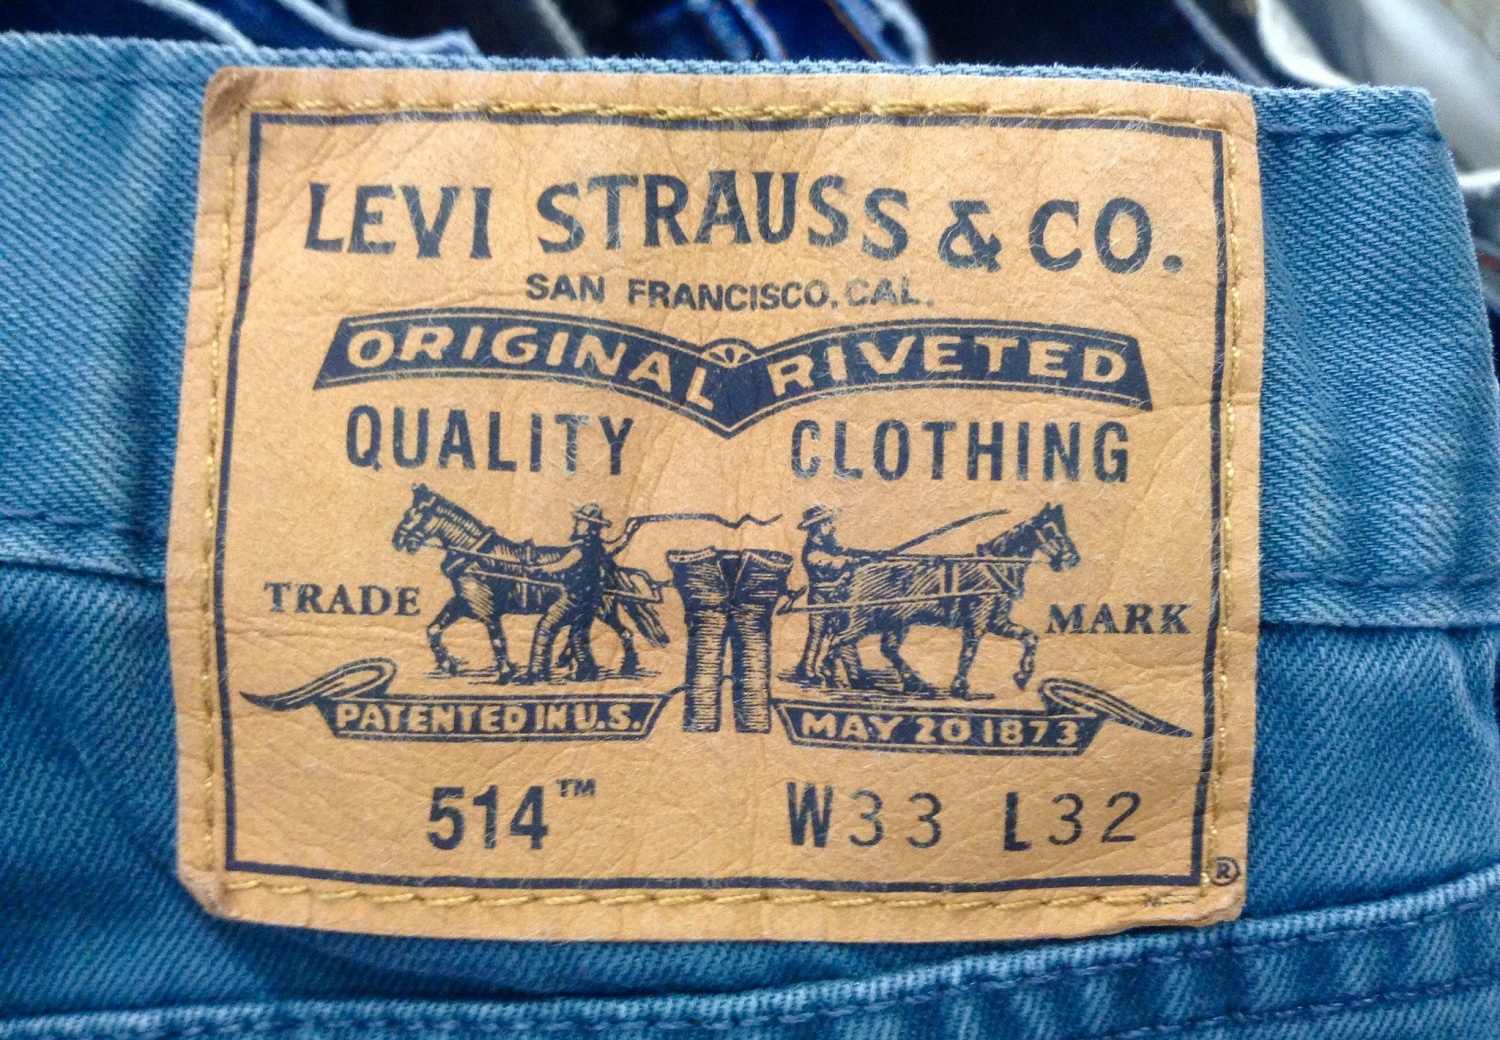 levis may 20 1873